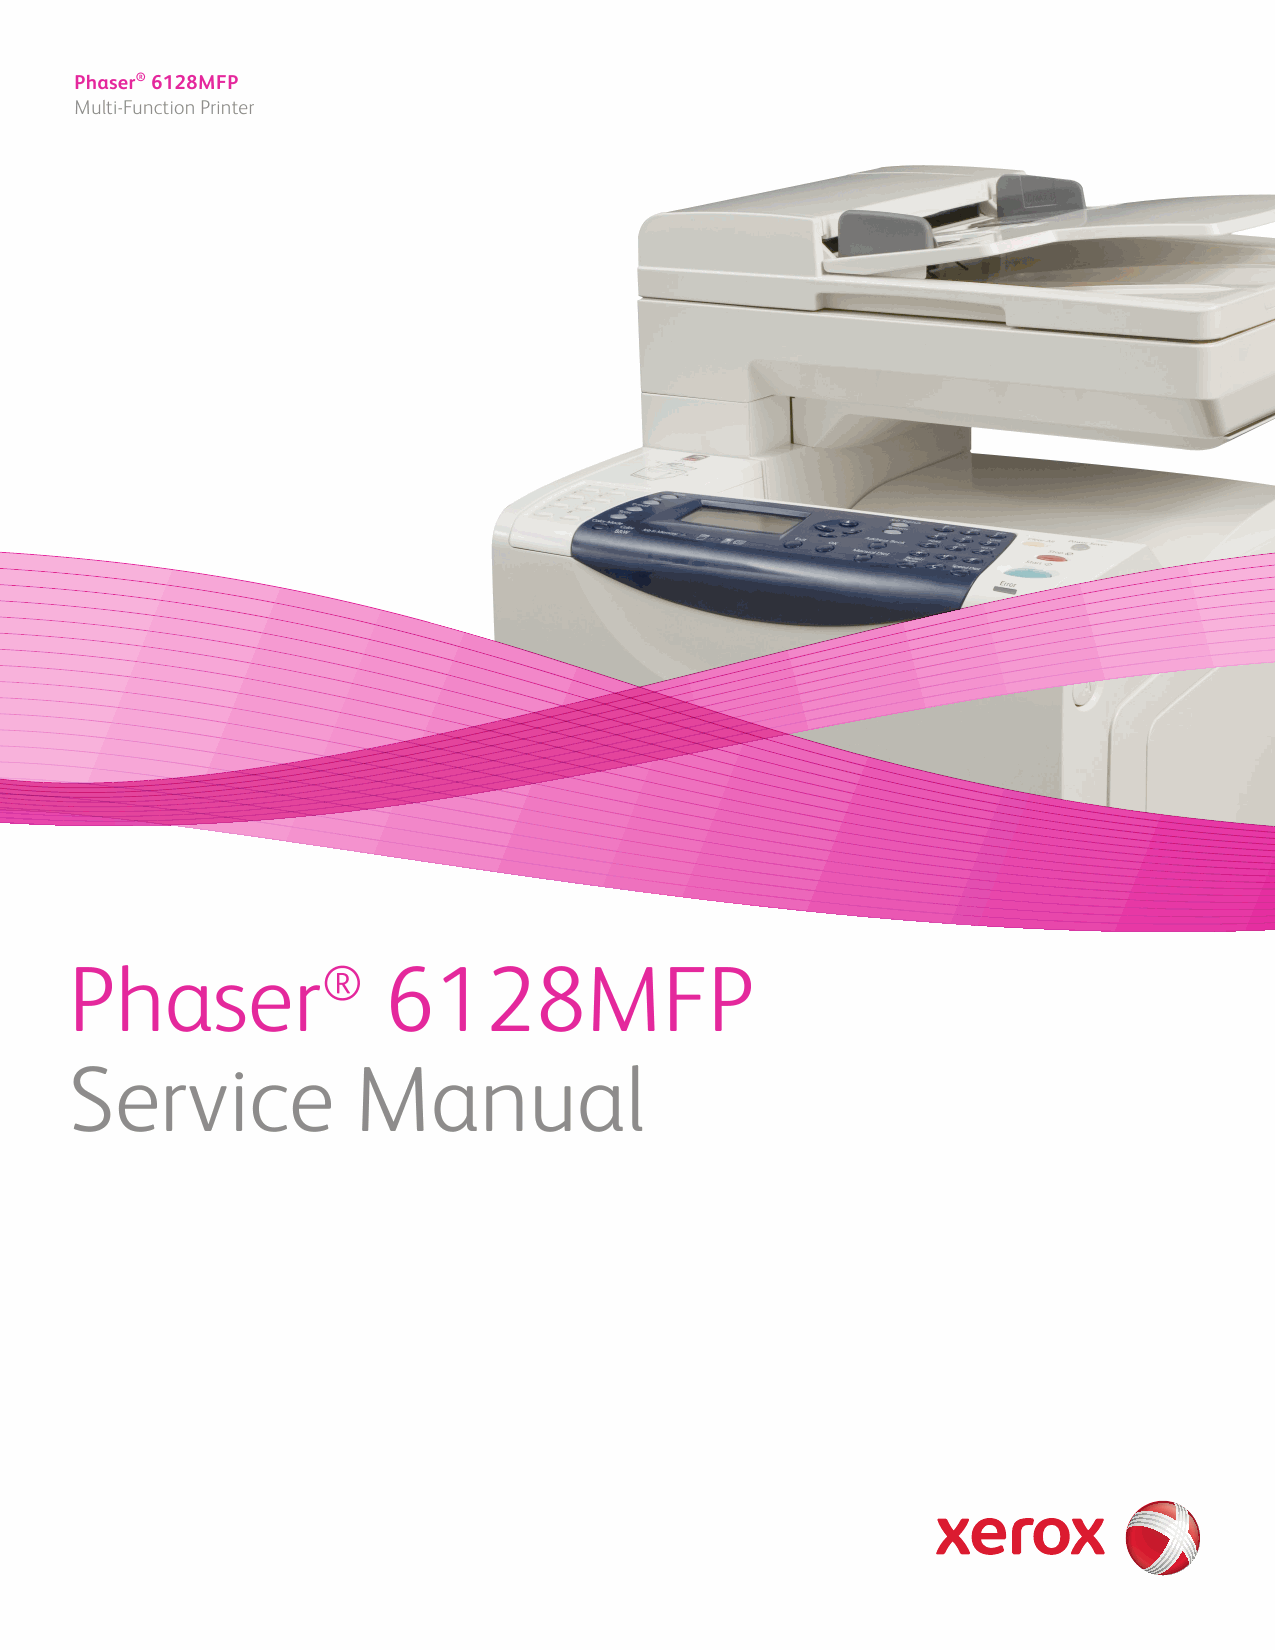 Xerox Phaser 6128-MFP Parts List and Service Manual-1